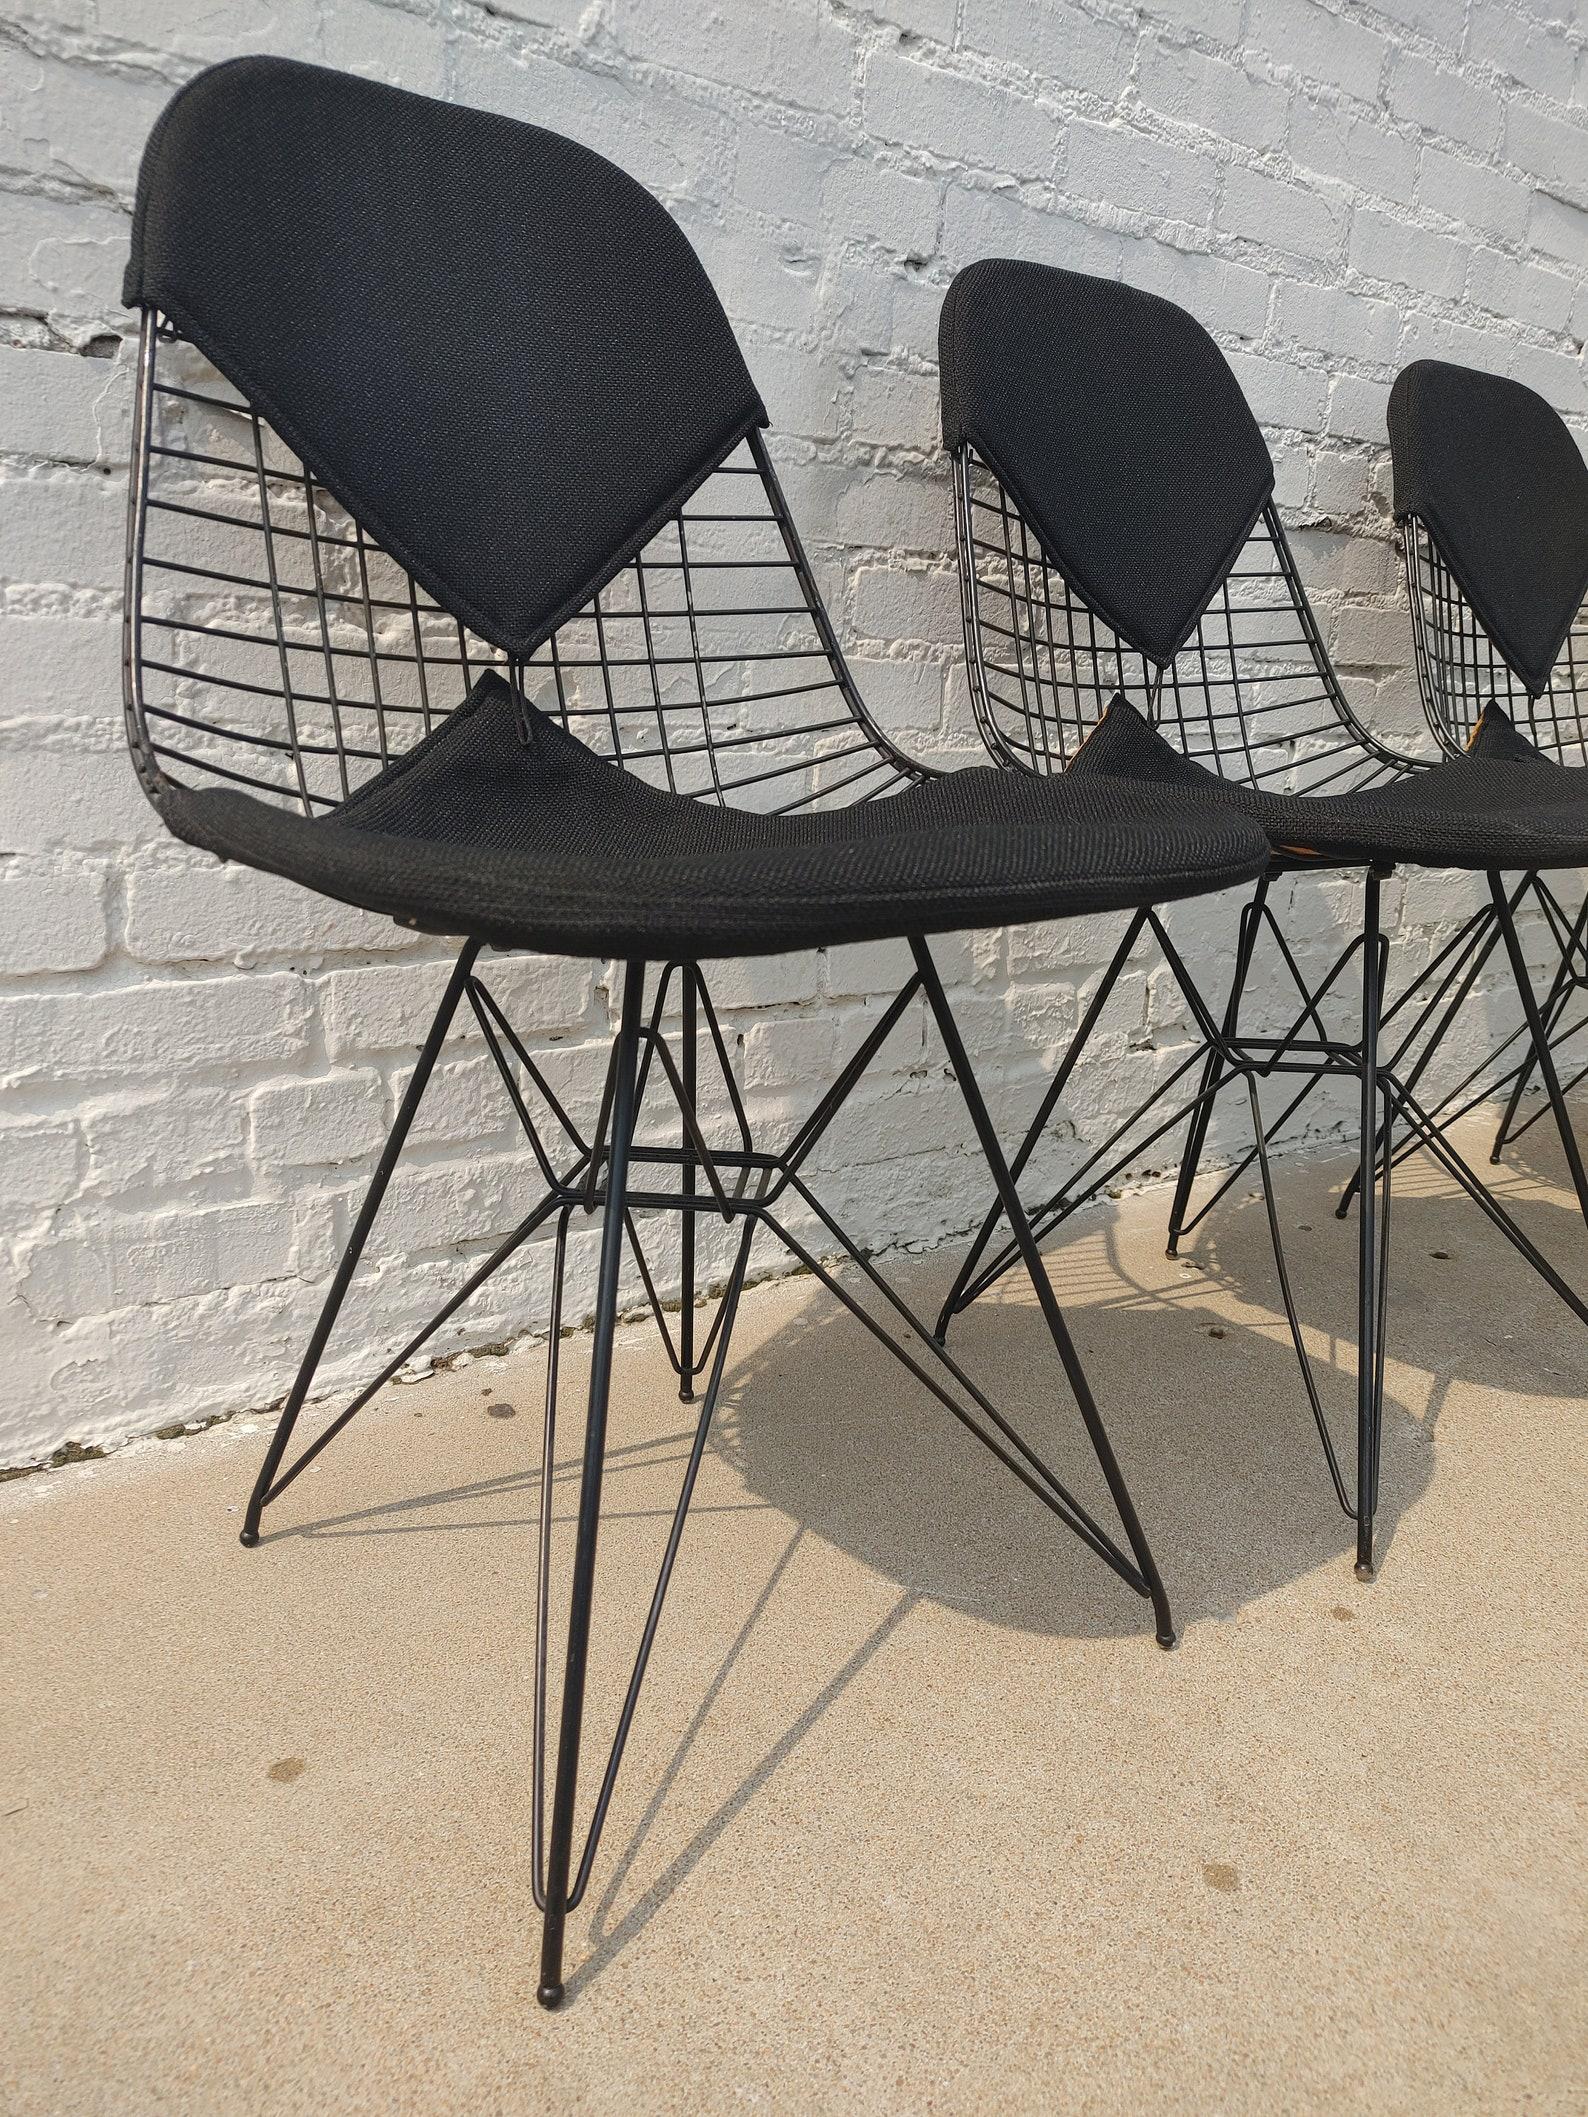 Set of 4 Mid Century Modern Herman Miller Eiffel Wire Chairs
 
Above average vintage condition and structurally sound. Have some expected slight finish wear and scratching. Bikini buttons which hold the top upholstery to the bottom are all missing.